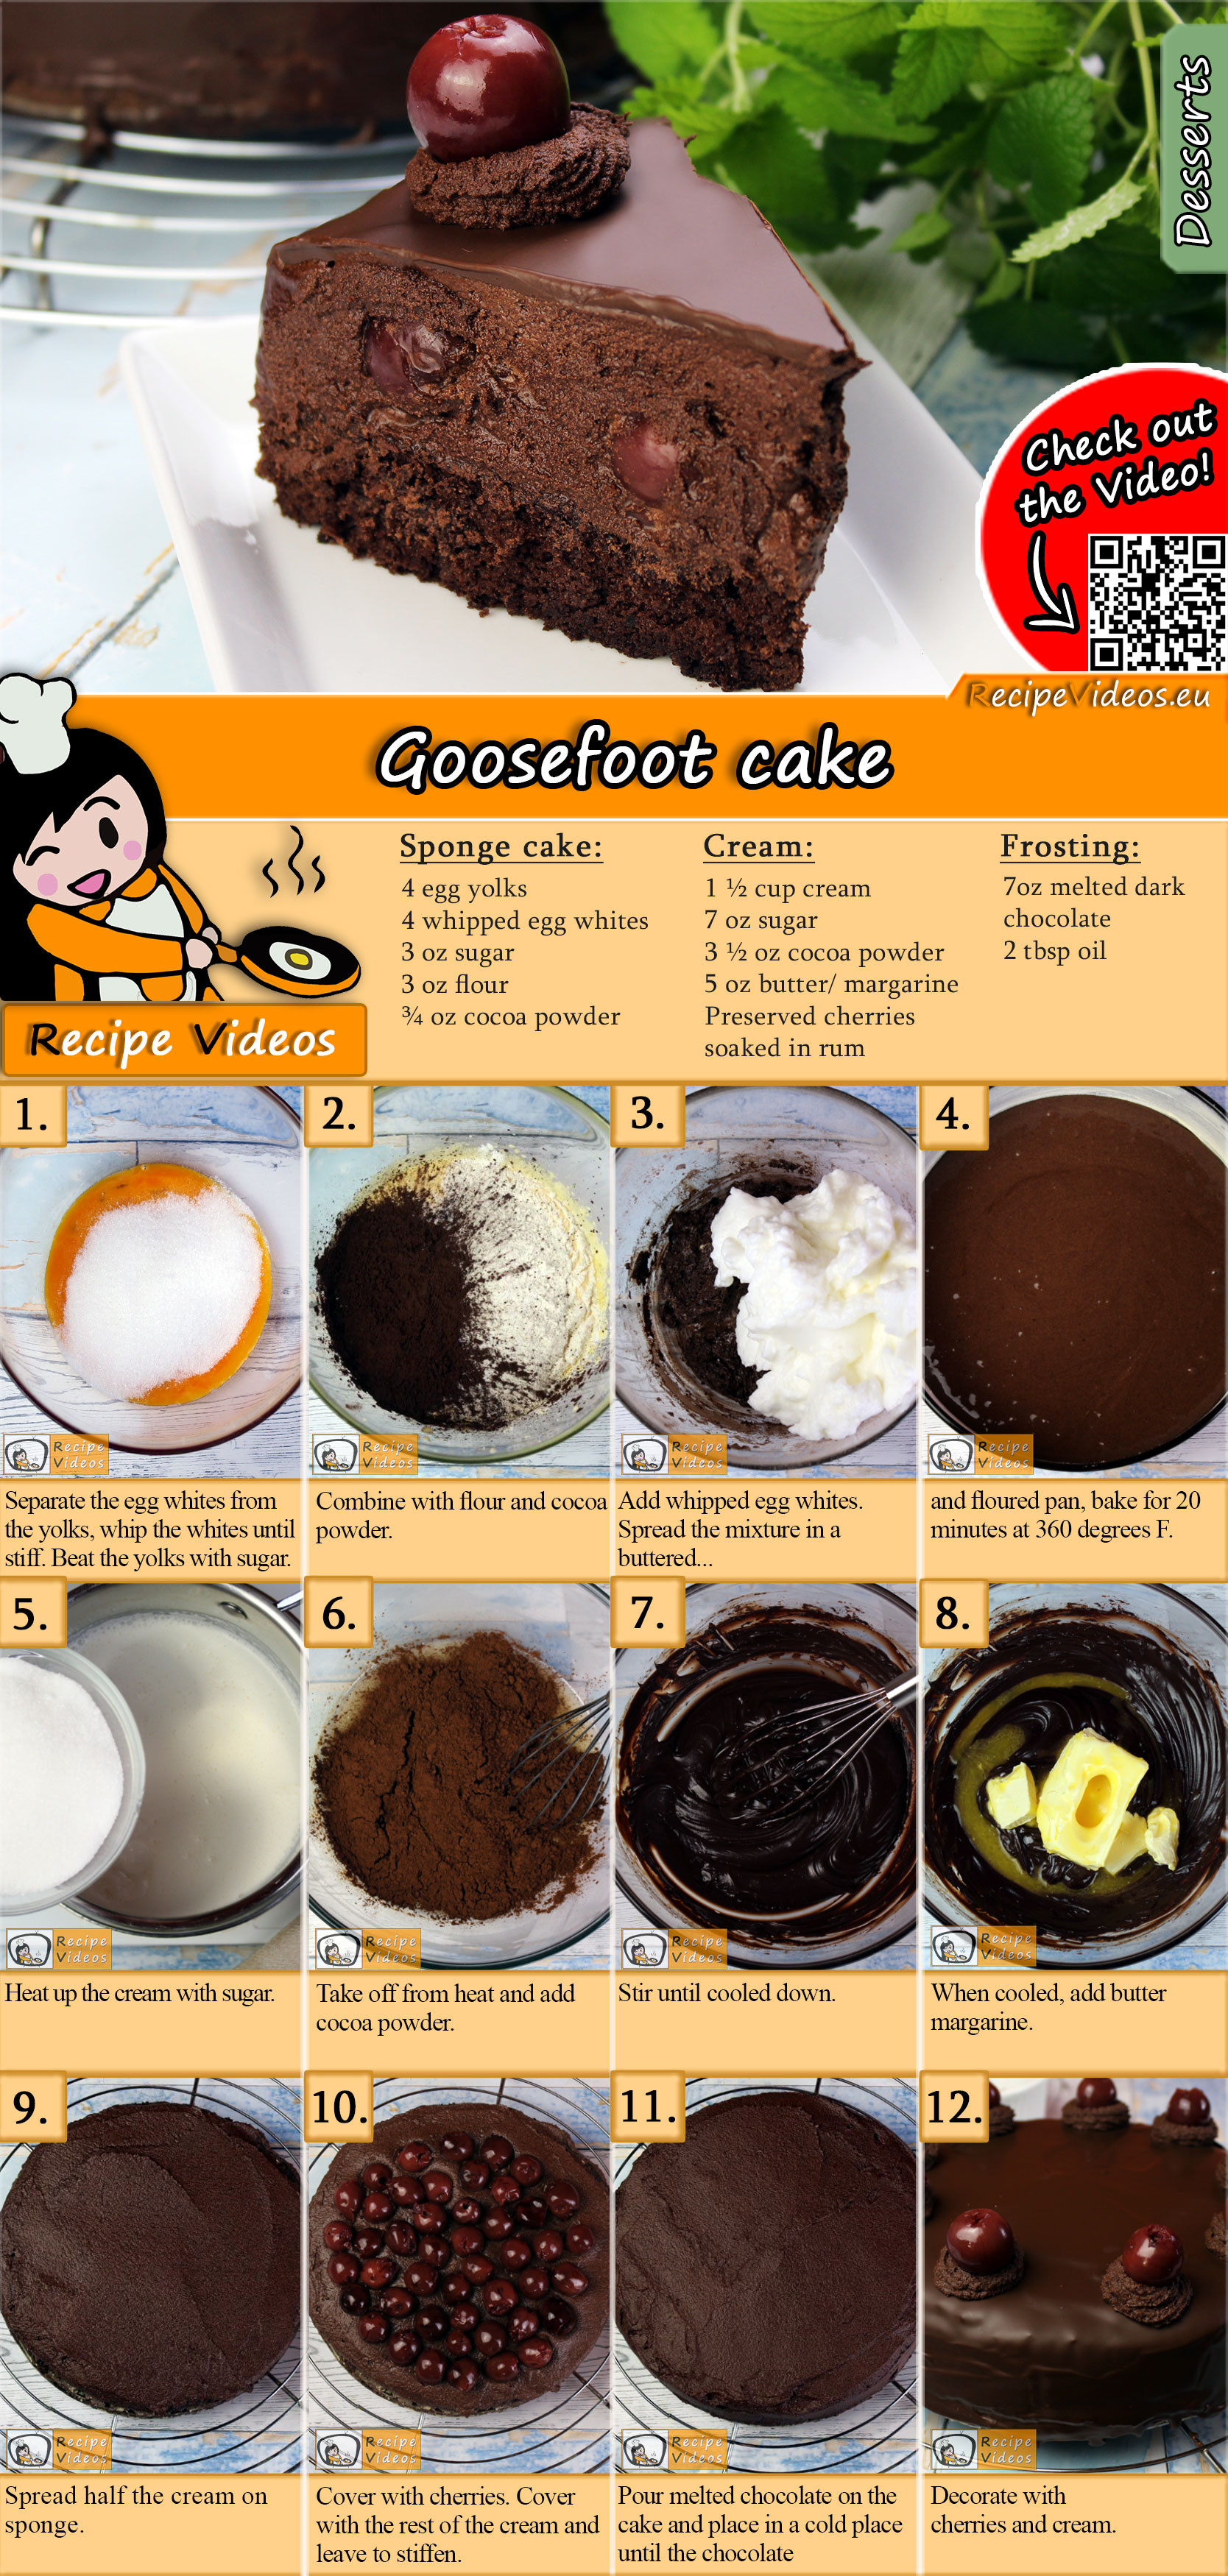 Goosefoot cake recipe with video